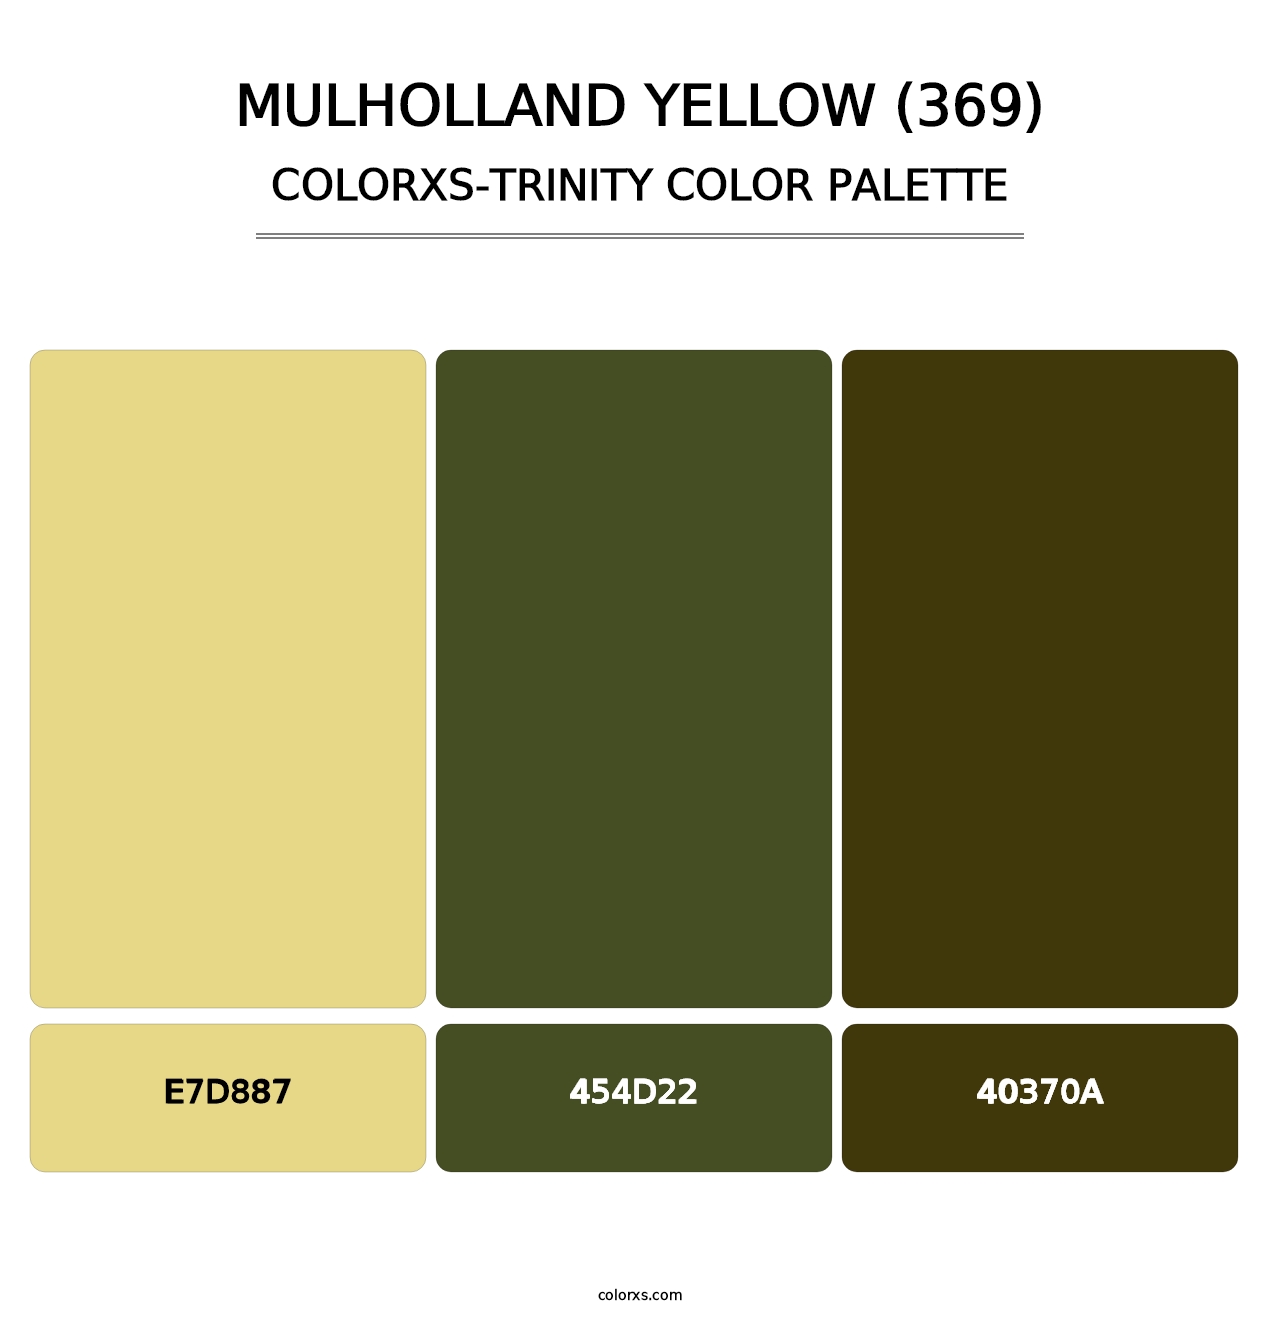 Mulholland Yellow (369) - Colorxs Trinity Palette